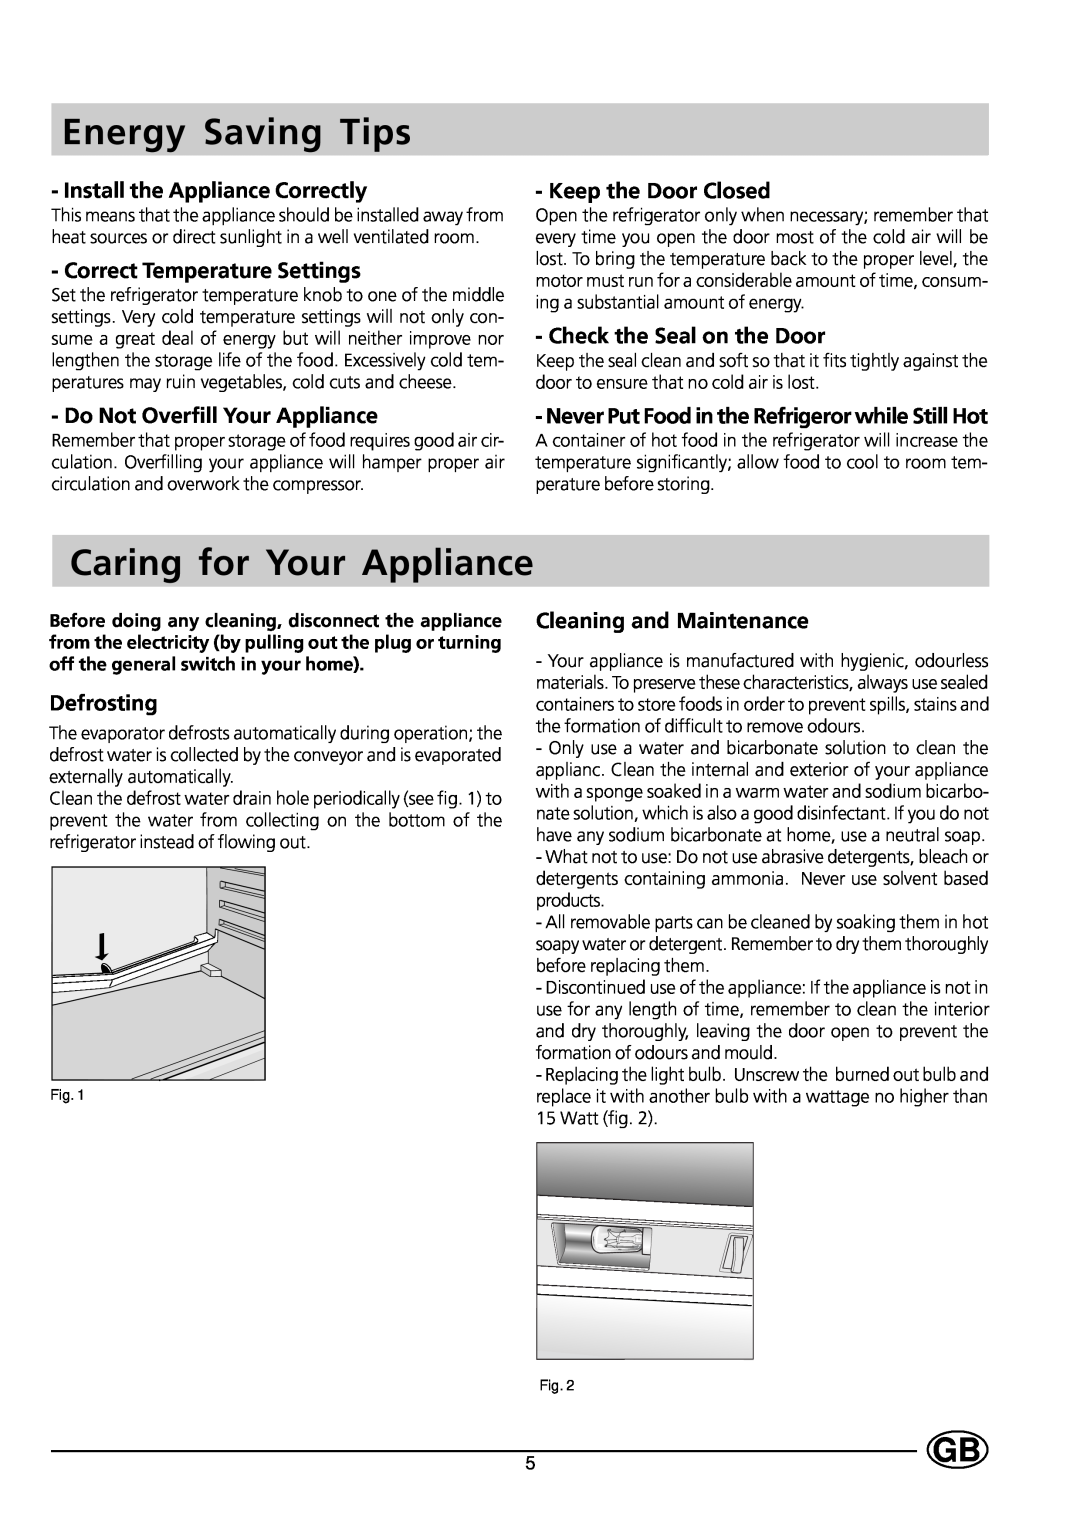 Indesit RG1140 manual Energy Saving Tips, Caring for Your Appliance, Install the Appliance Correctly, Keep the Door Closed 